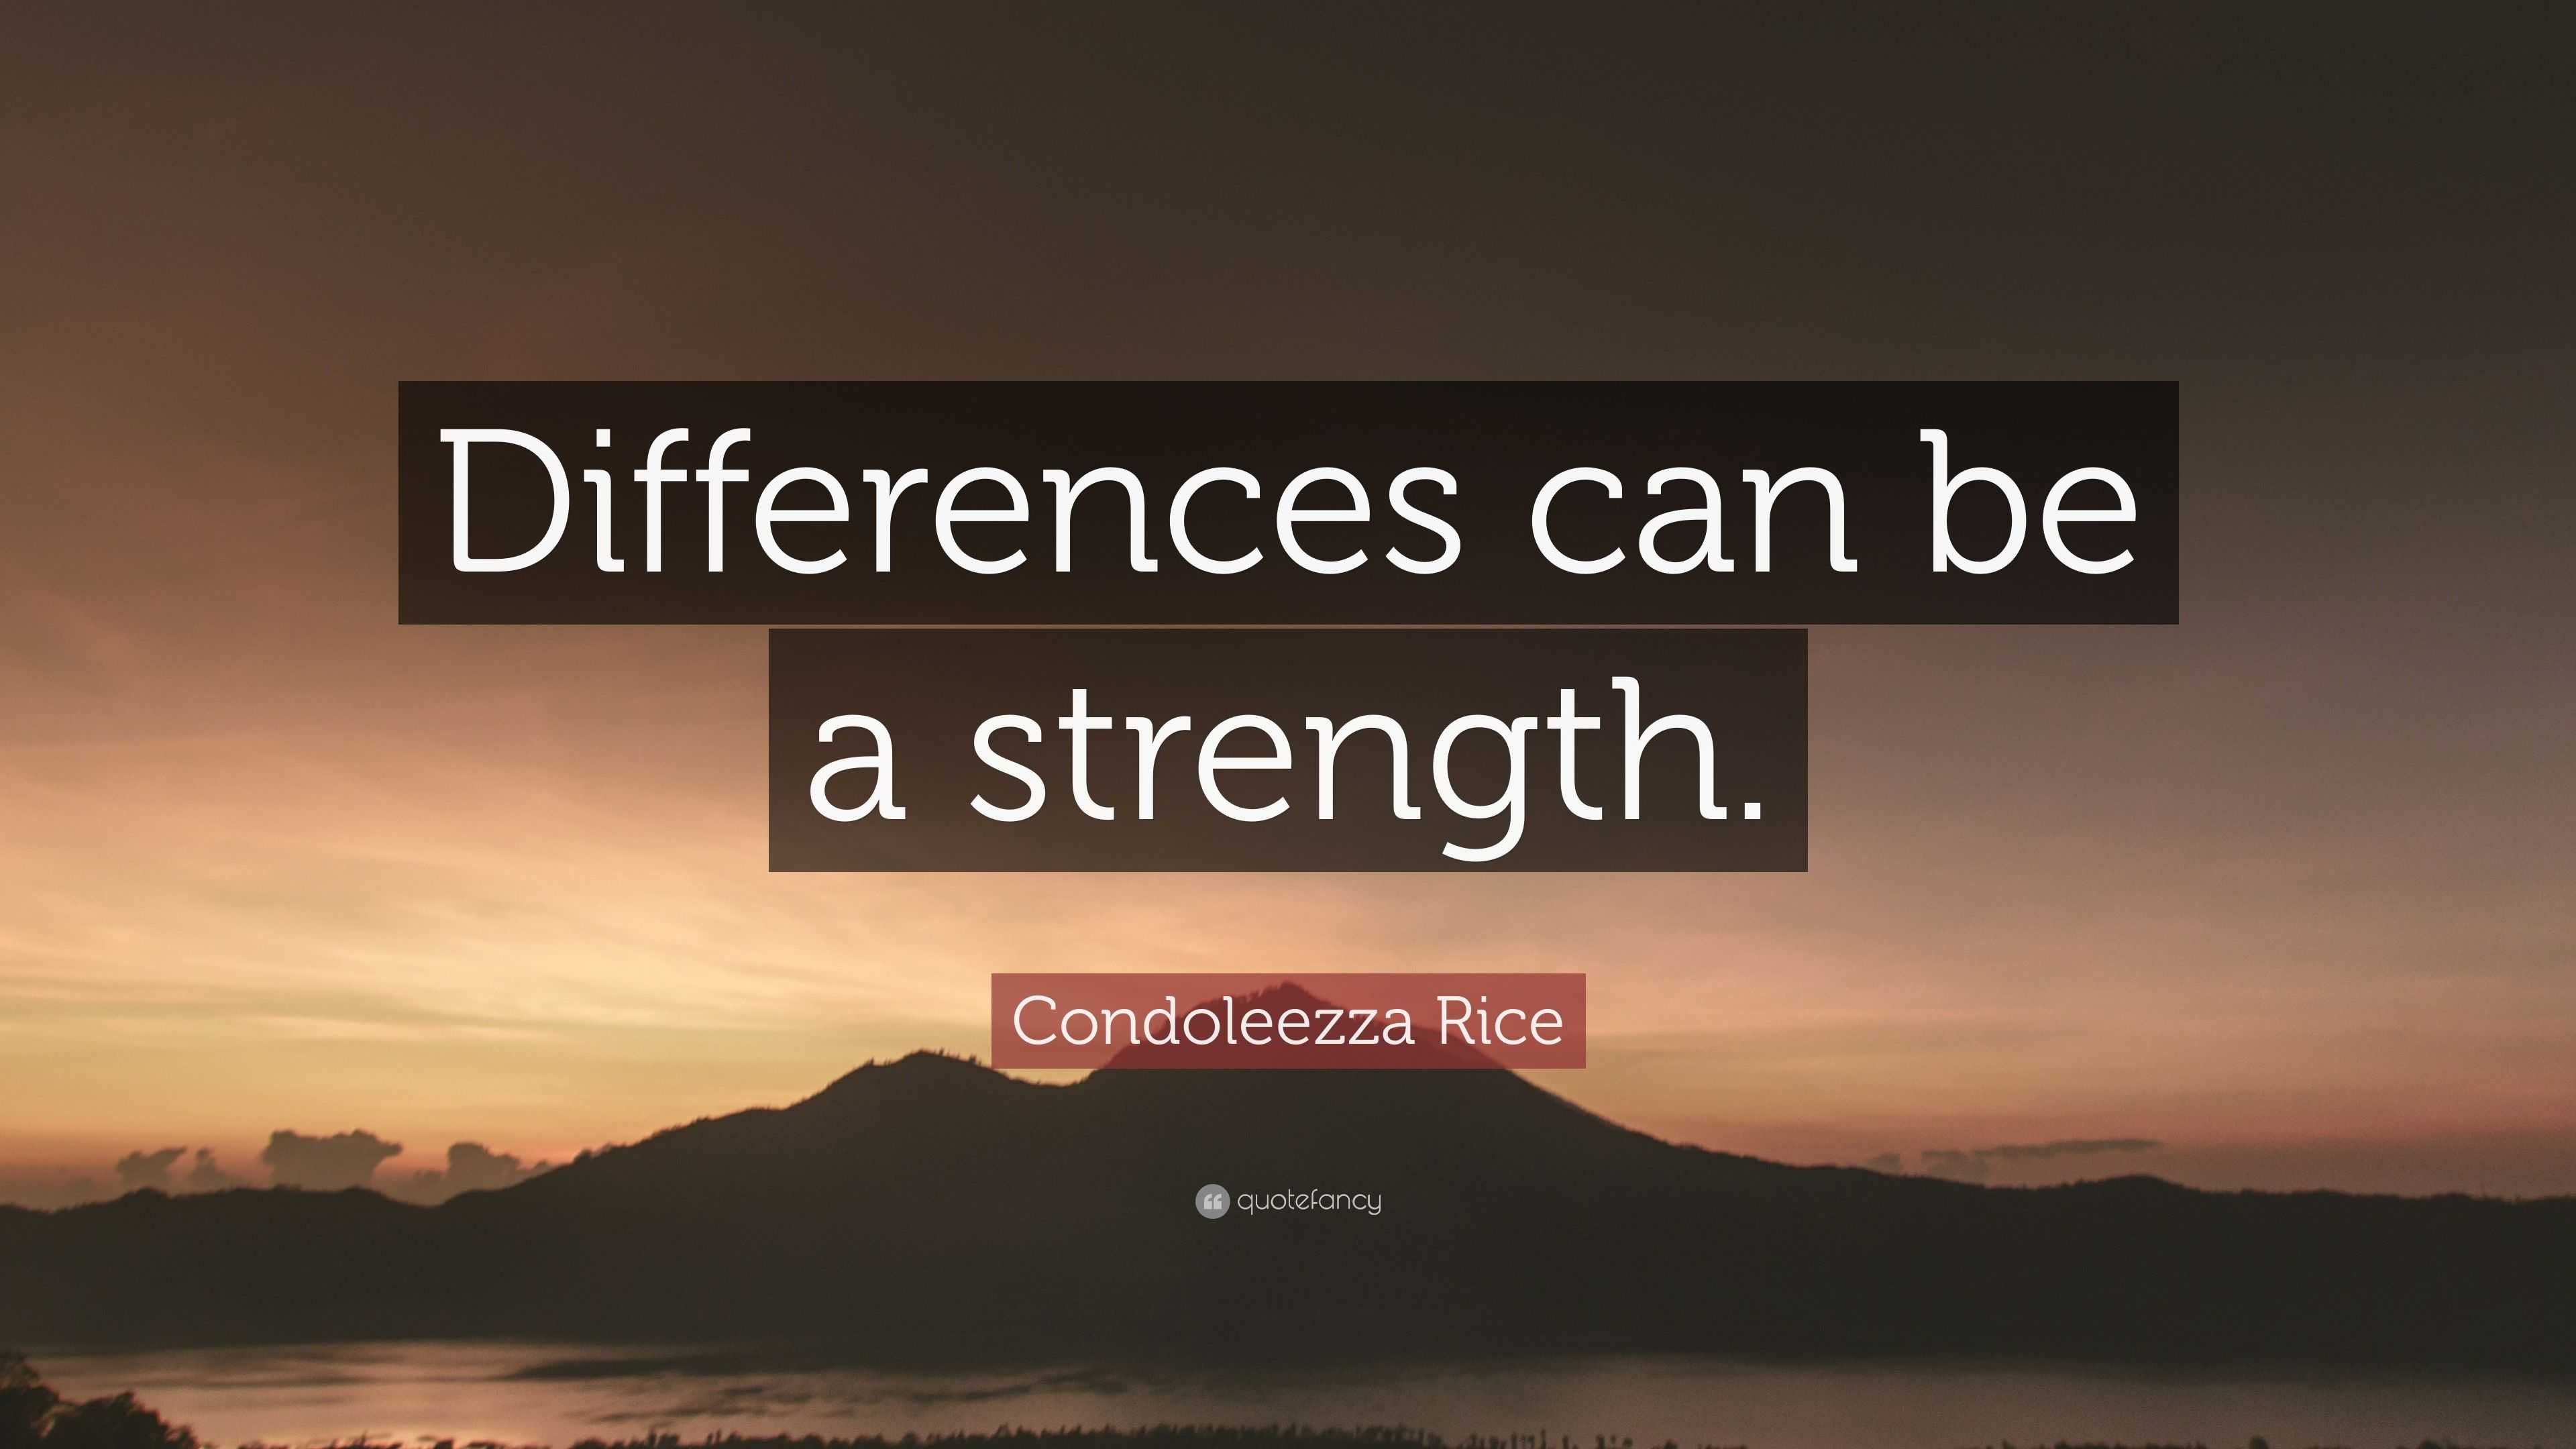 Condoleezza Rice Quote: "Differences can be a strength."